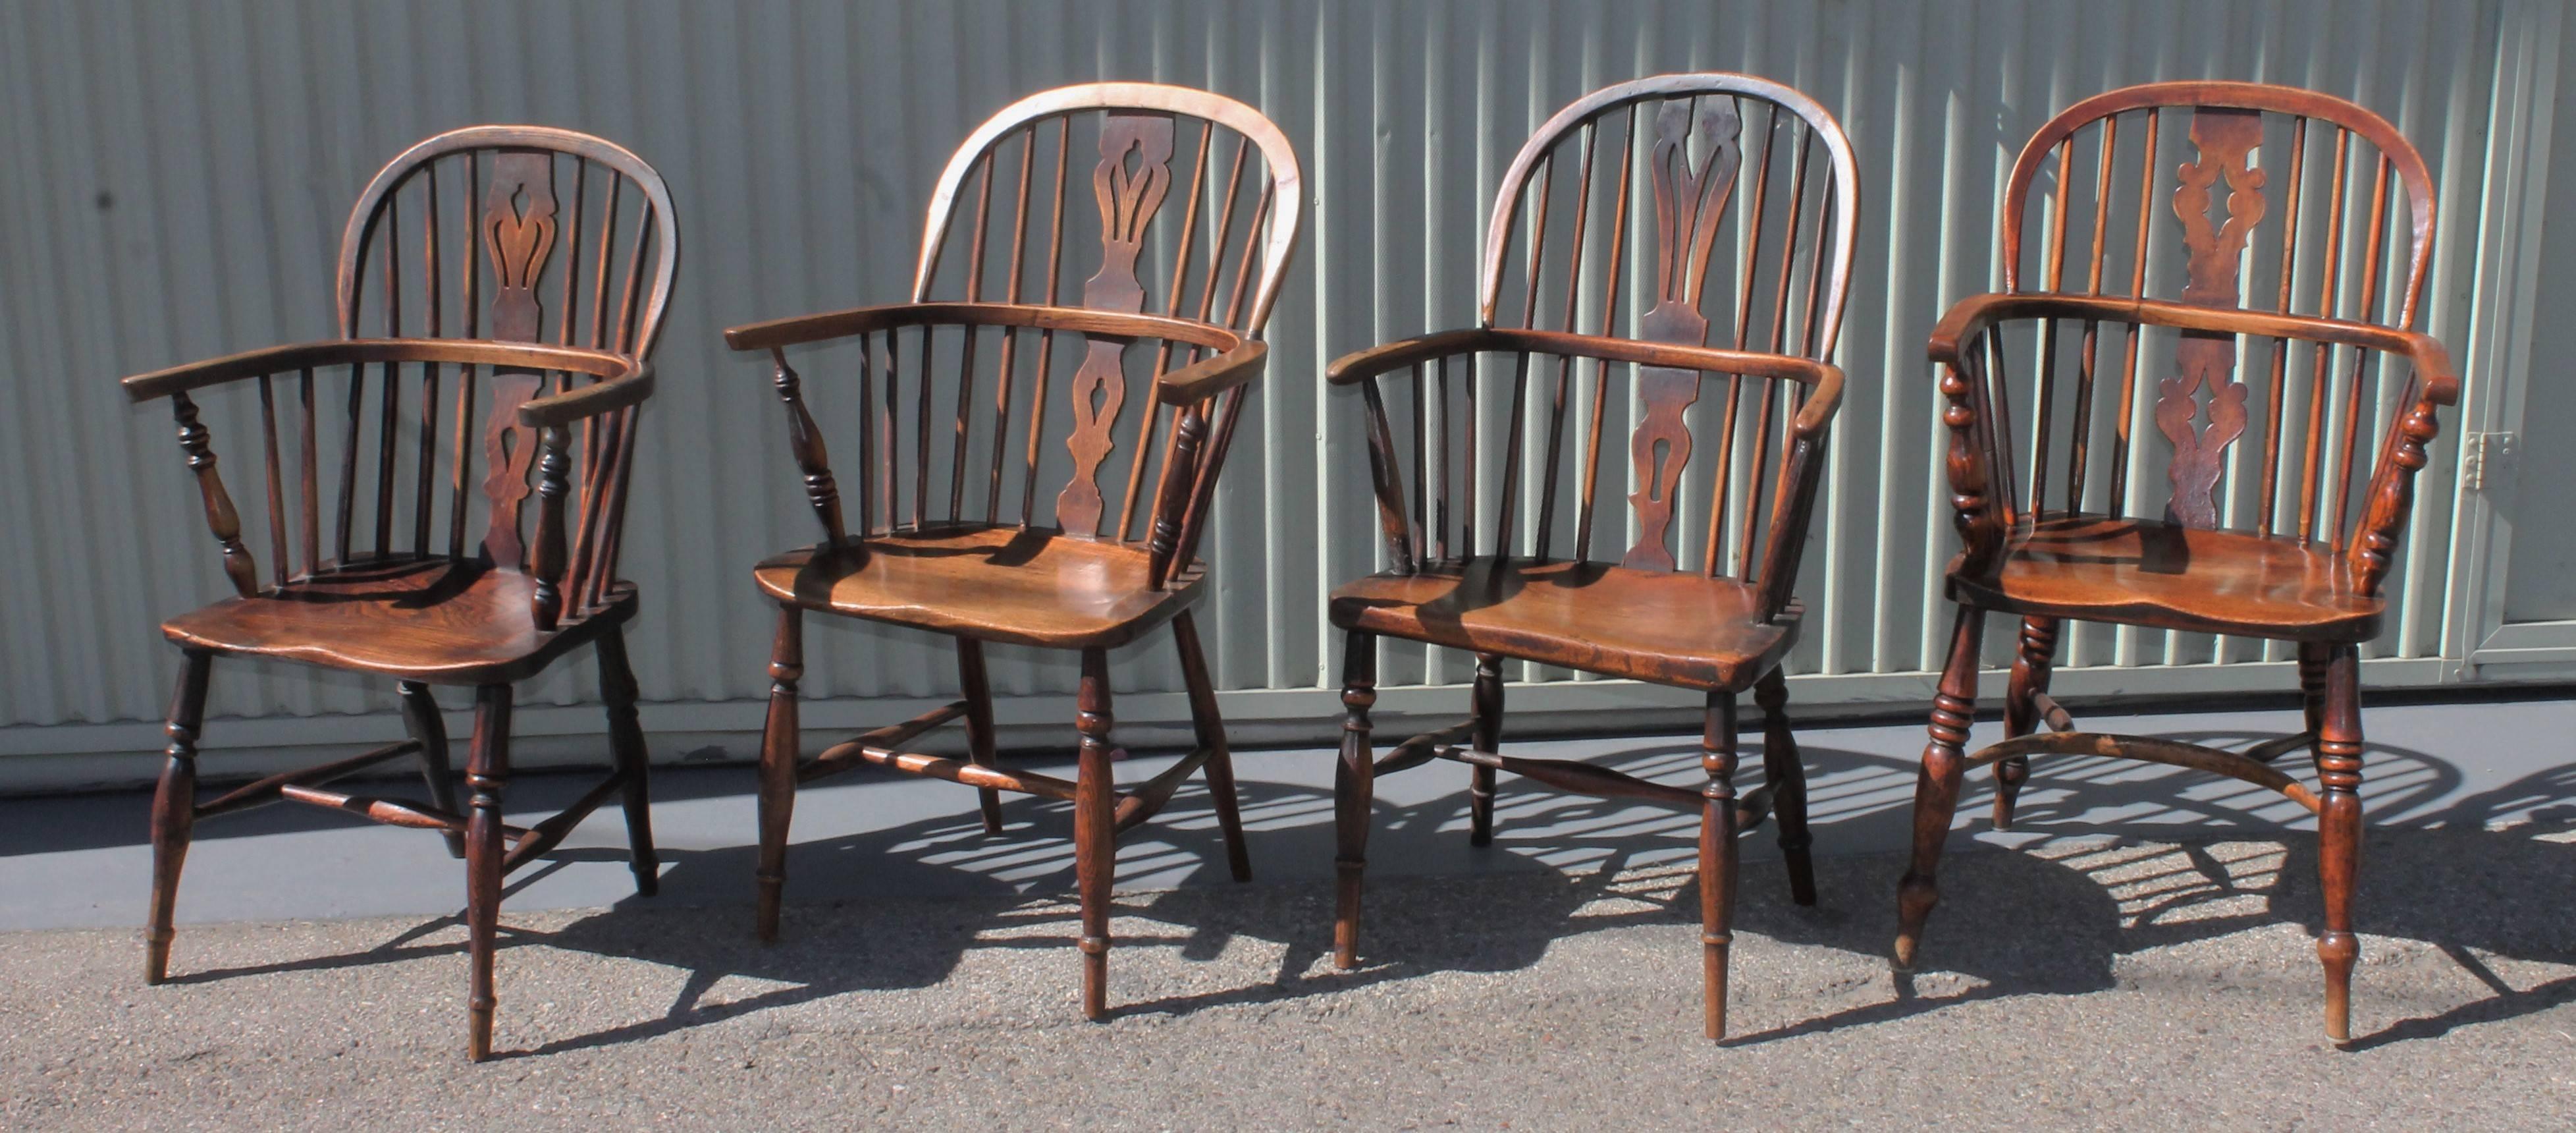 Set of Six Early 19th Century English Windsor Chairs 3